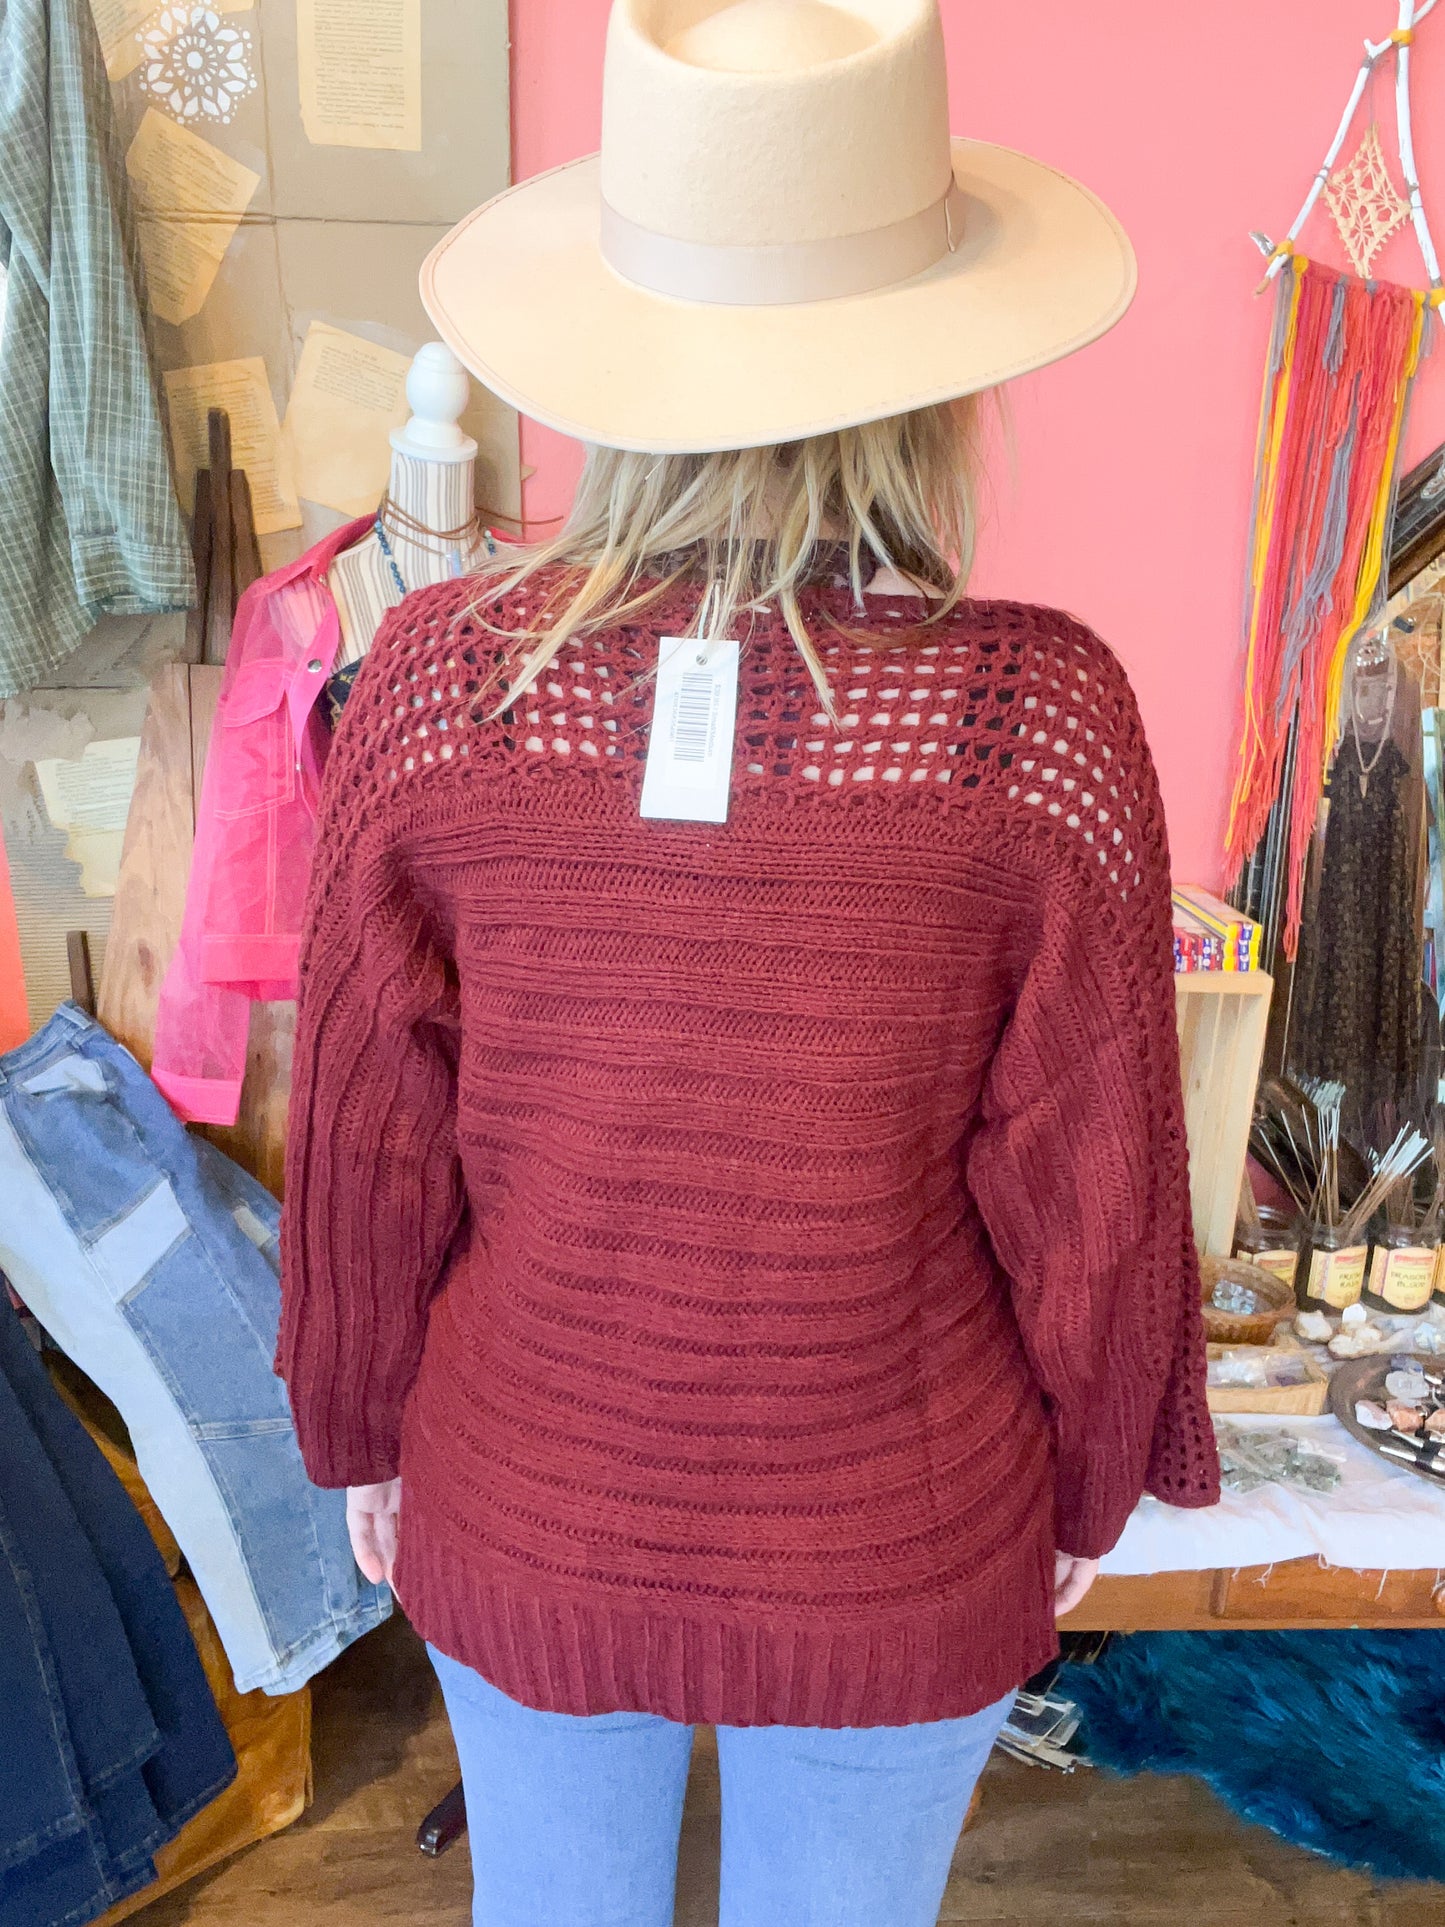 Solid Maroon Sweater with an Open Weave Knit Neckline